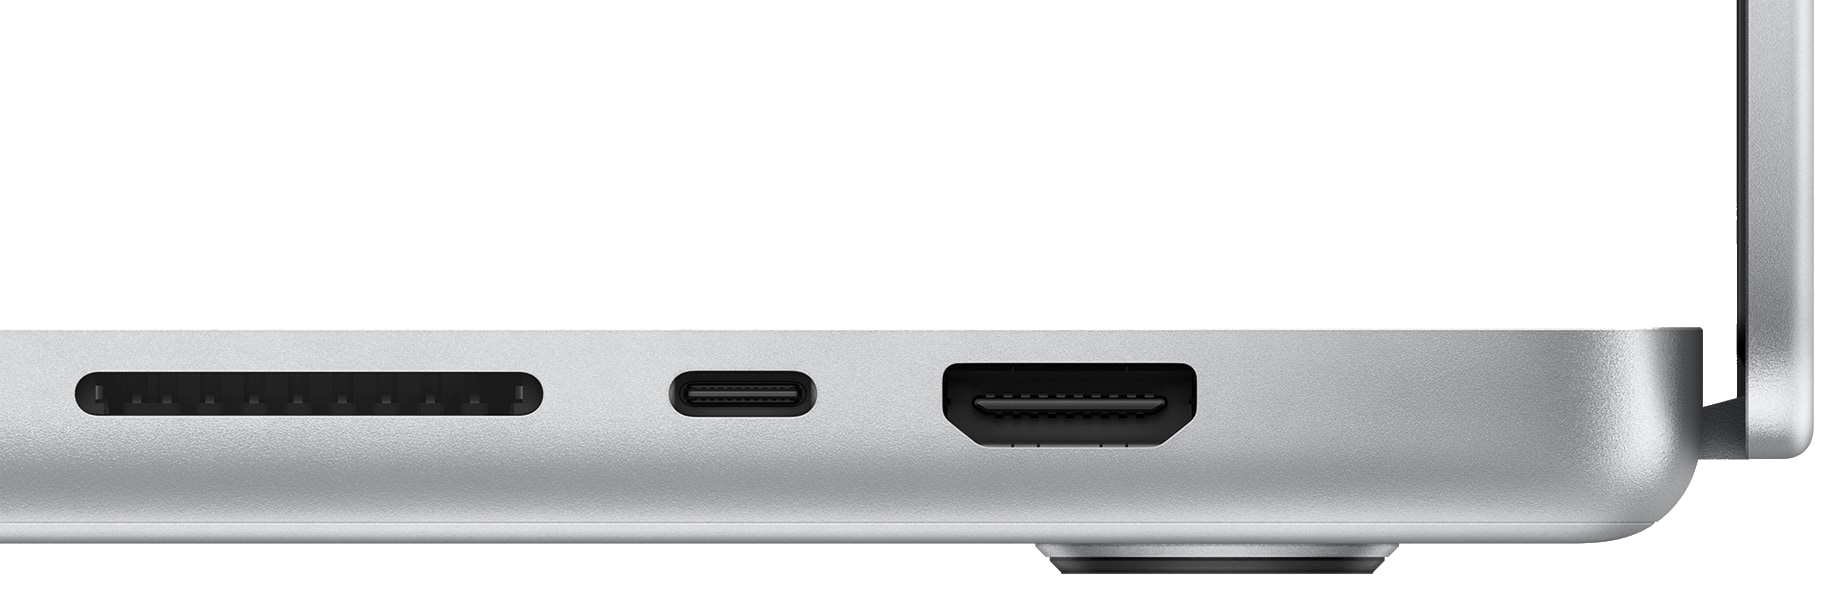 Apple's marketing image showing a side view of the 2021 MacBook Pro with the following ports, from left to right: SDXC card, USB-C and HDMI